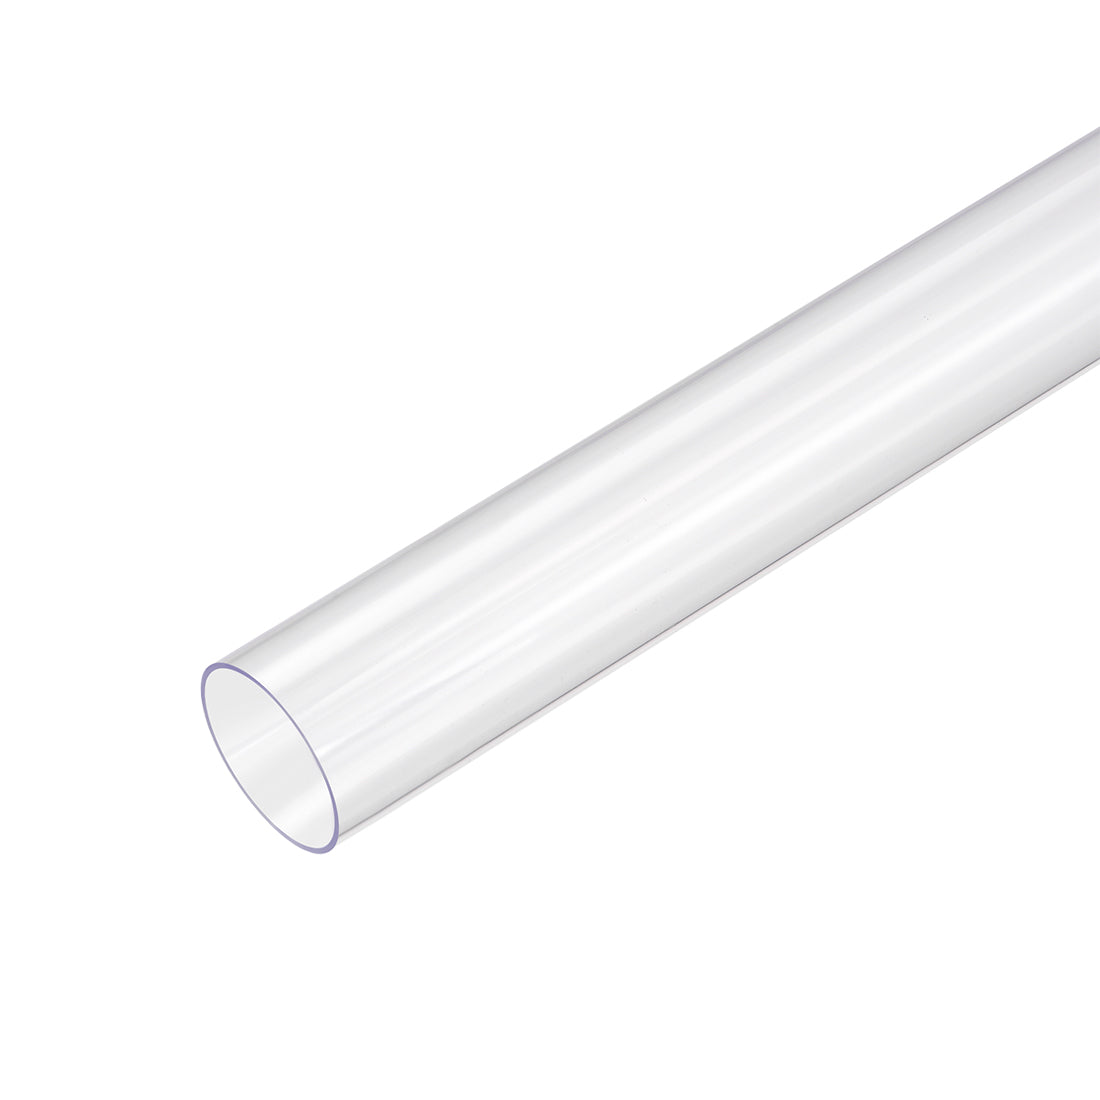 uxcell Uxcell PVC Rigid Round Tubing,Clear,30mm ID x 32mm OD,0.5M/1.64Ft Length